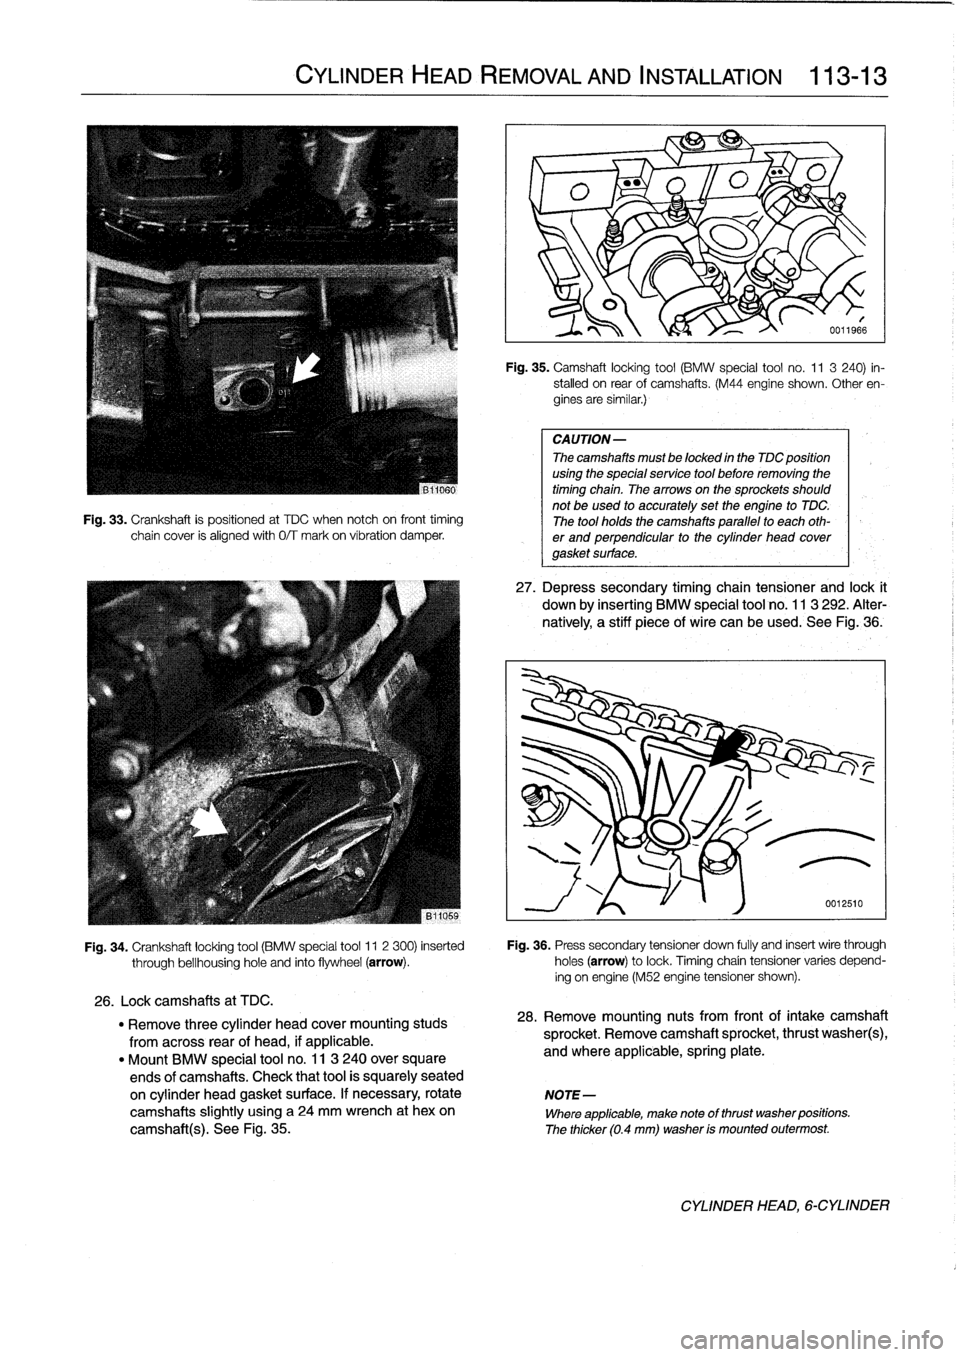 BMW 318i 1997 E36 Repair Manual 
Fig
.
33
.
Crankshaft
is
positioned
at
TDC
when
notch
oh
front
timing
chain
cover
is
alignedwith
0/T
mark
on
víbration
damper
.

CYLINDER
HEAD
REMOVAL
AND
INSTALLATION

	

113-
1
3

Fig
.
35
.
Camsh